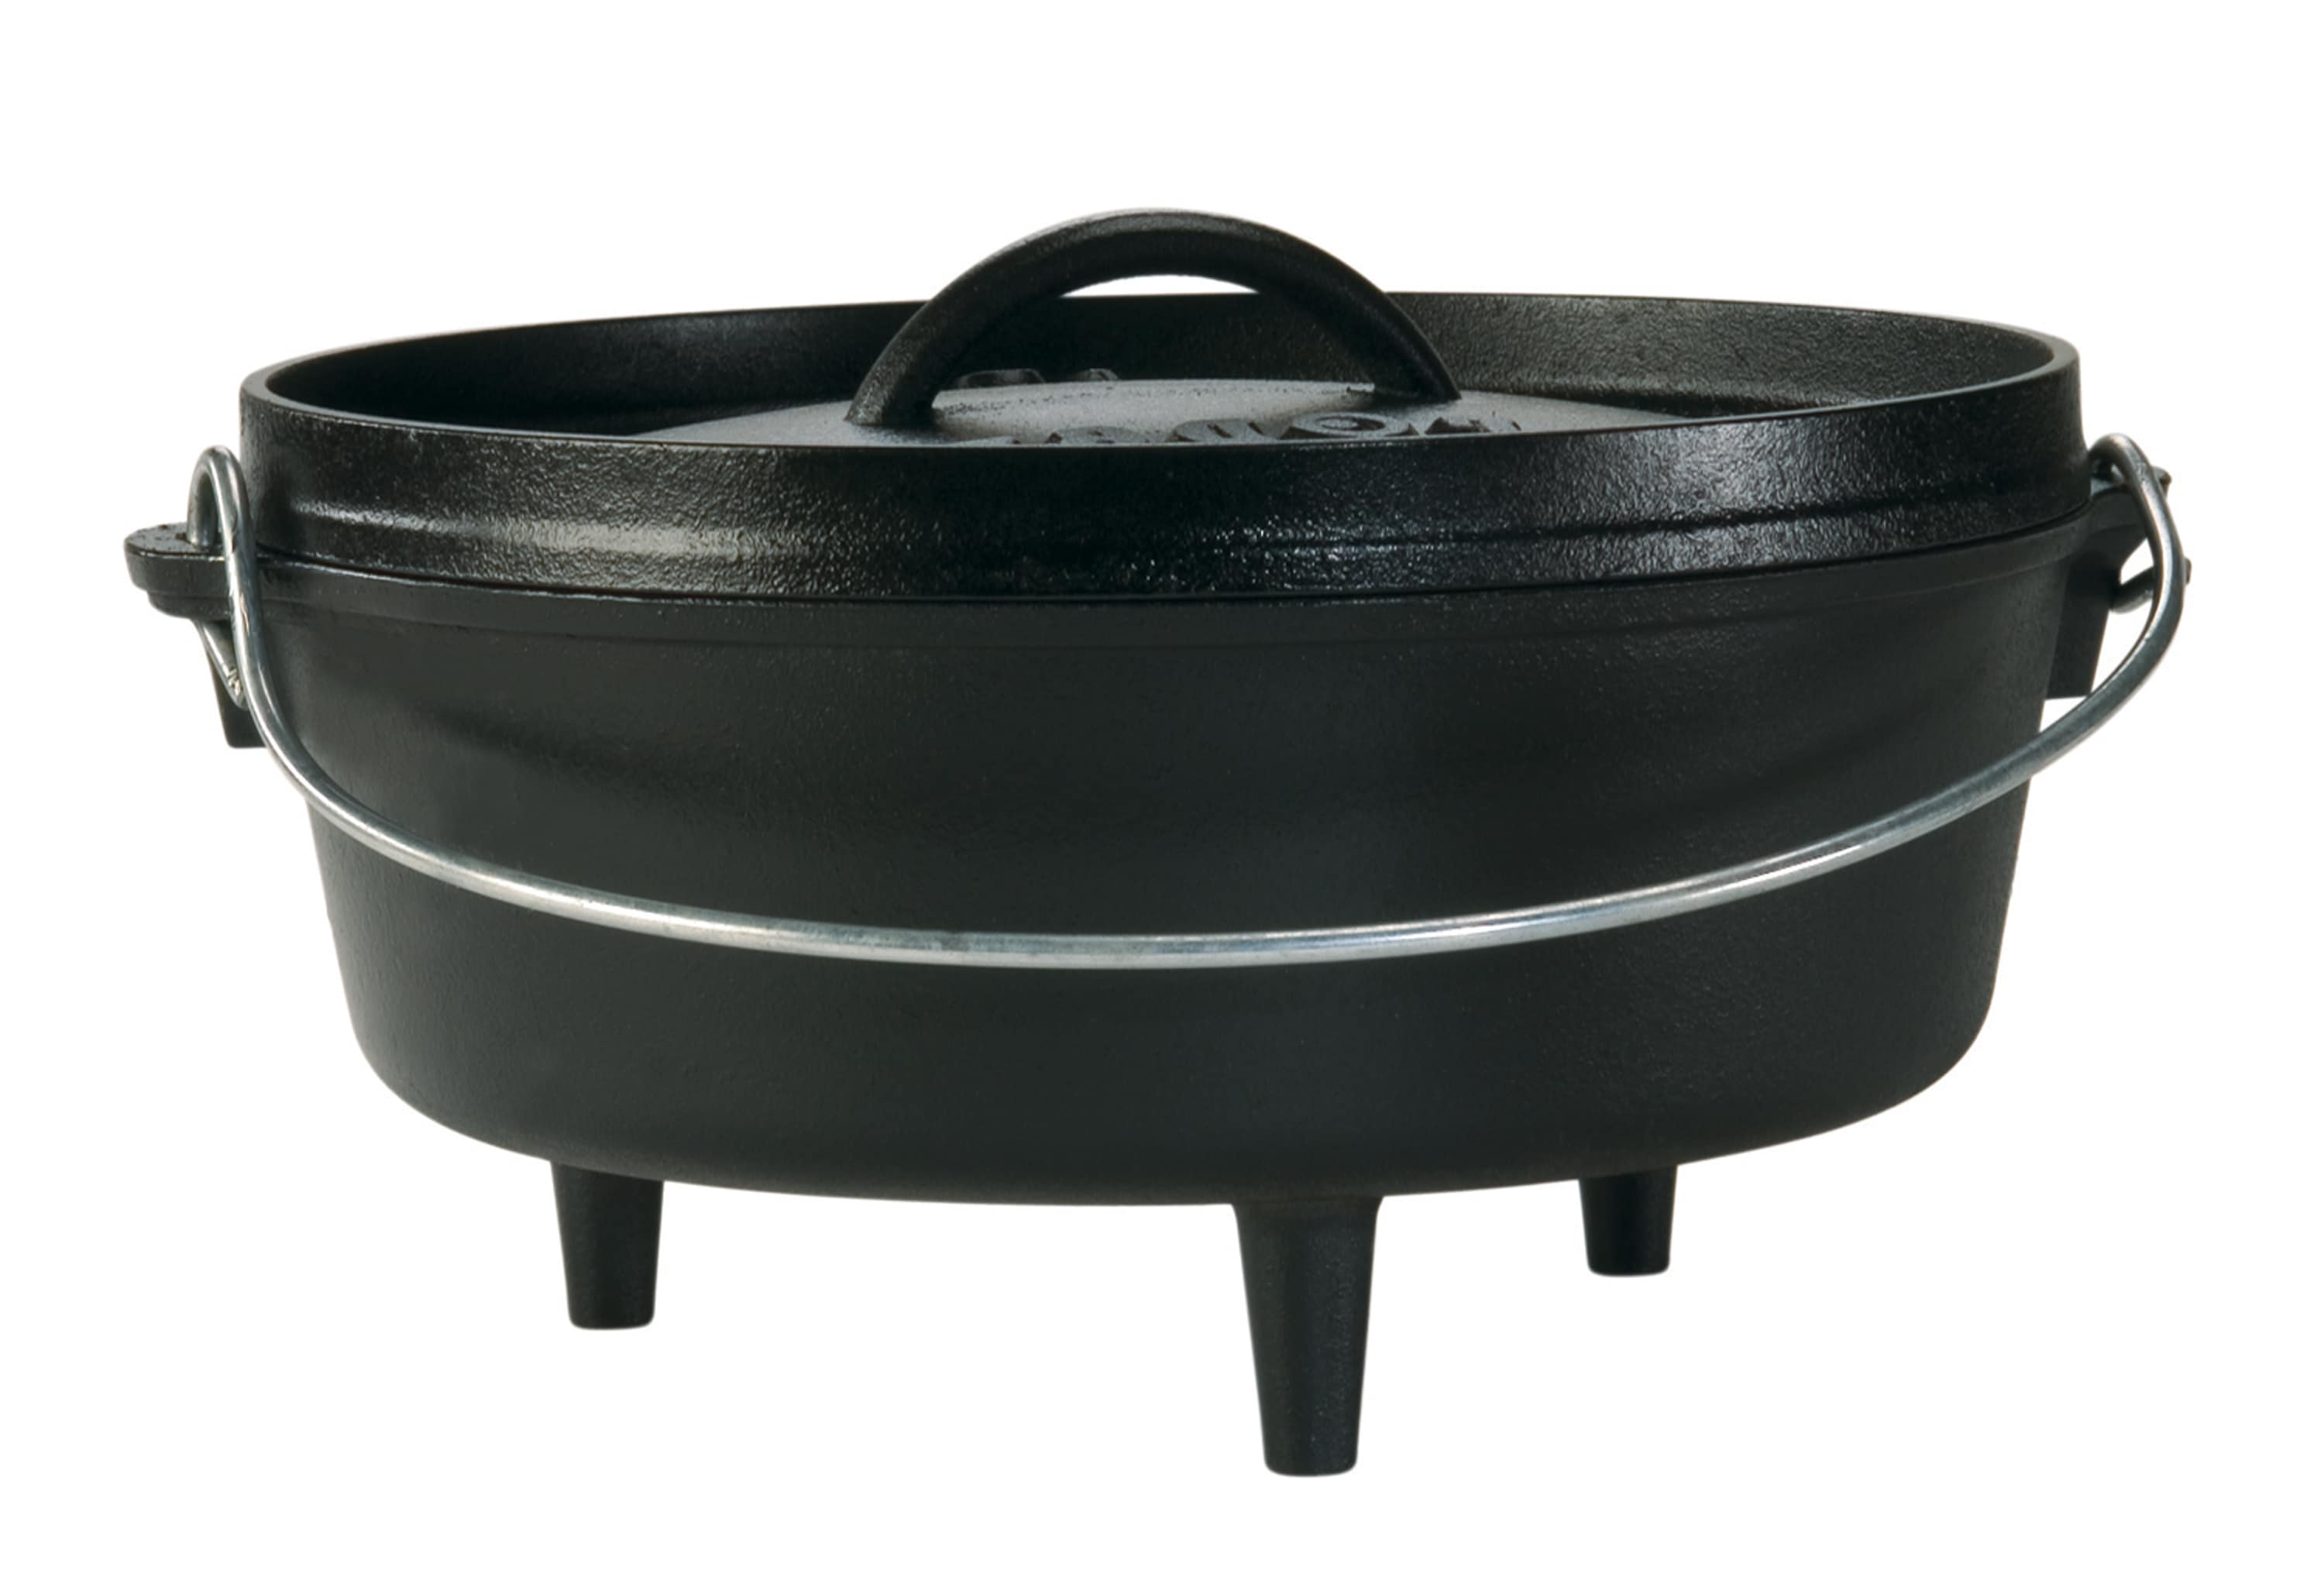 offset Miljard hospita Lodge Cast Iron 4-Quart Cast Iron Dutch Oven in the Cooking Pots department  at Lowes.com